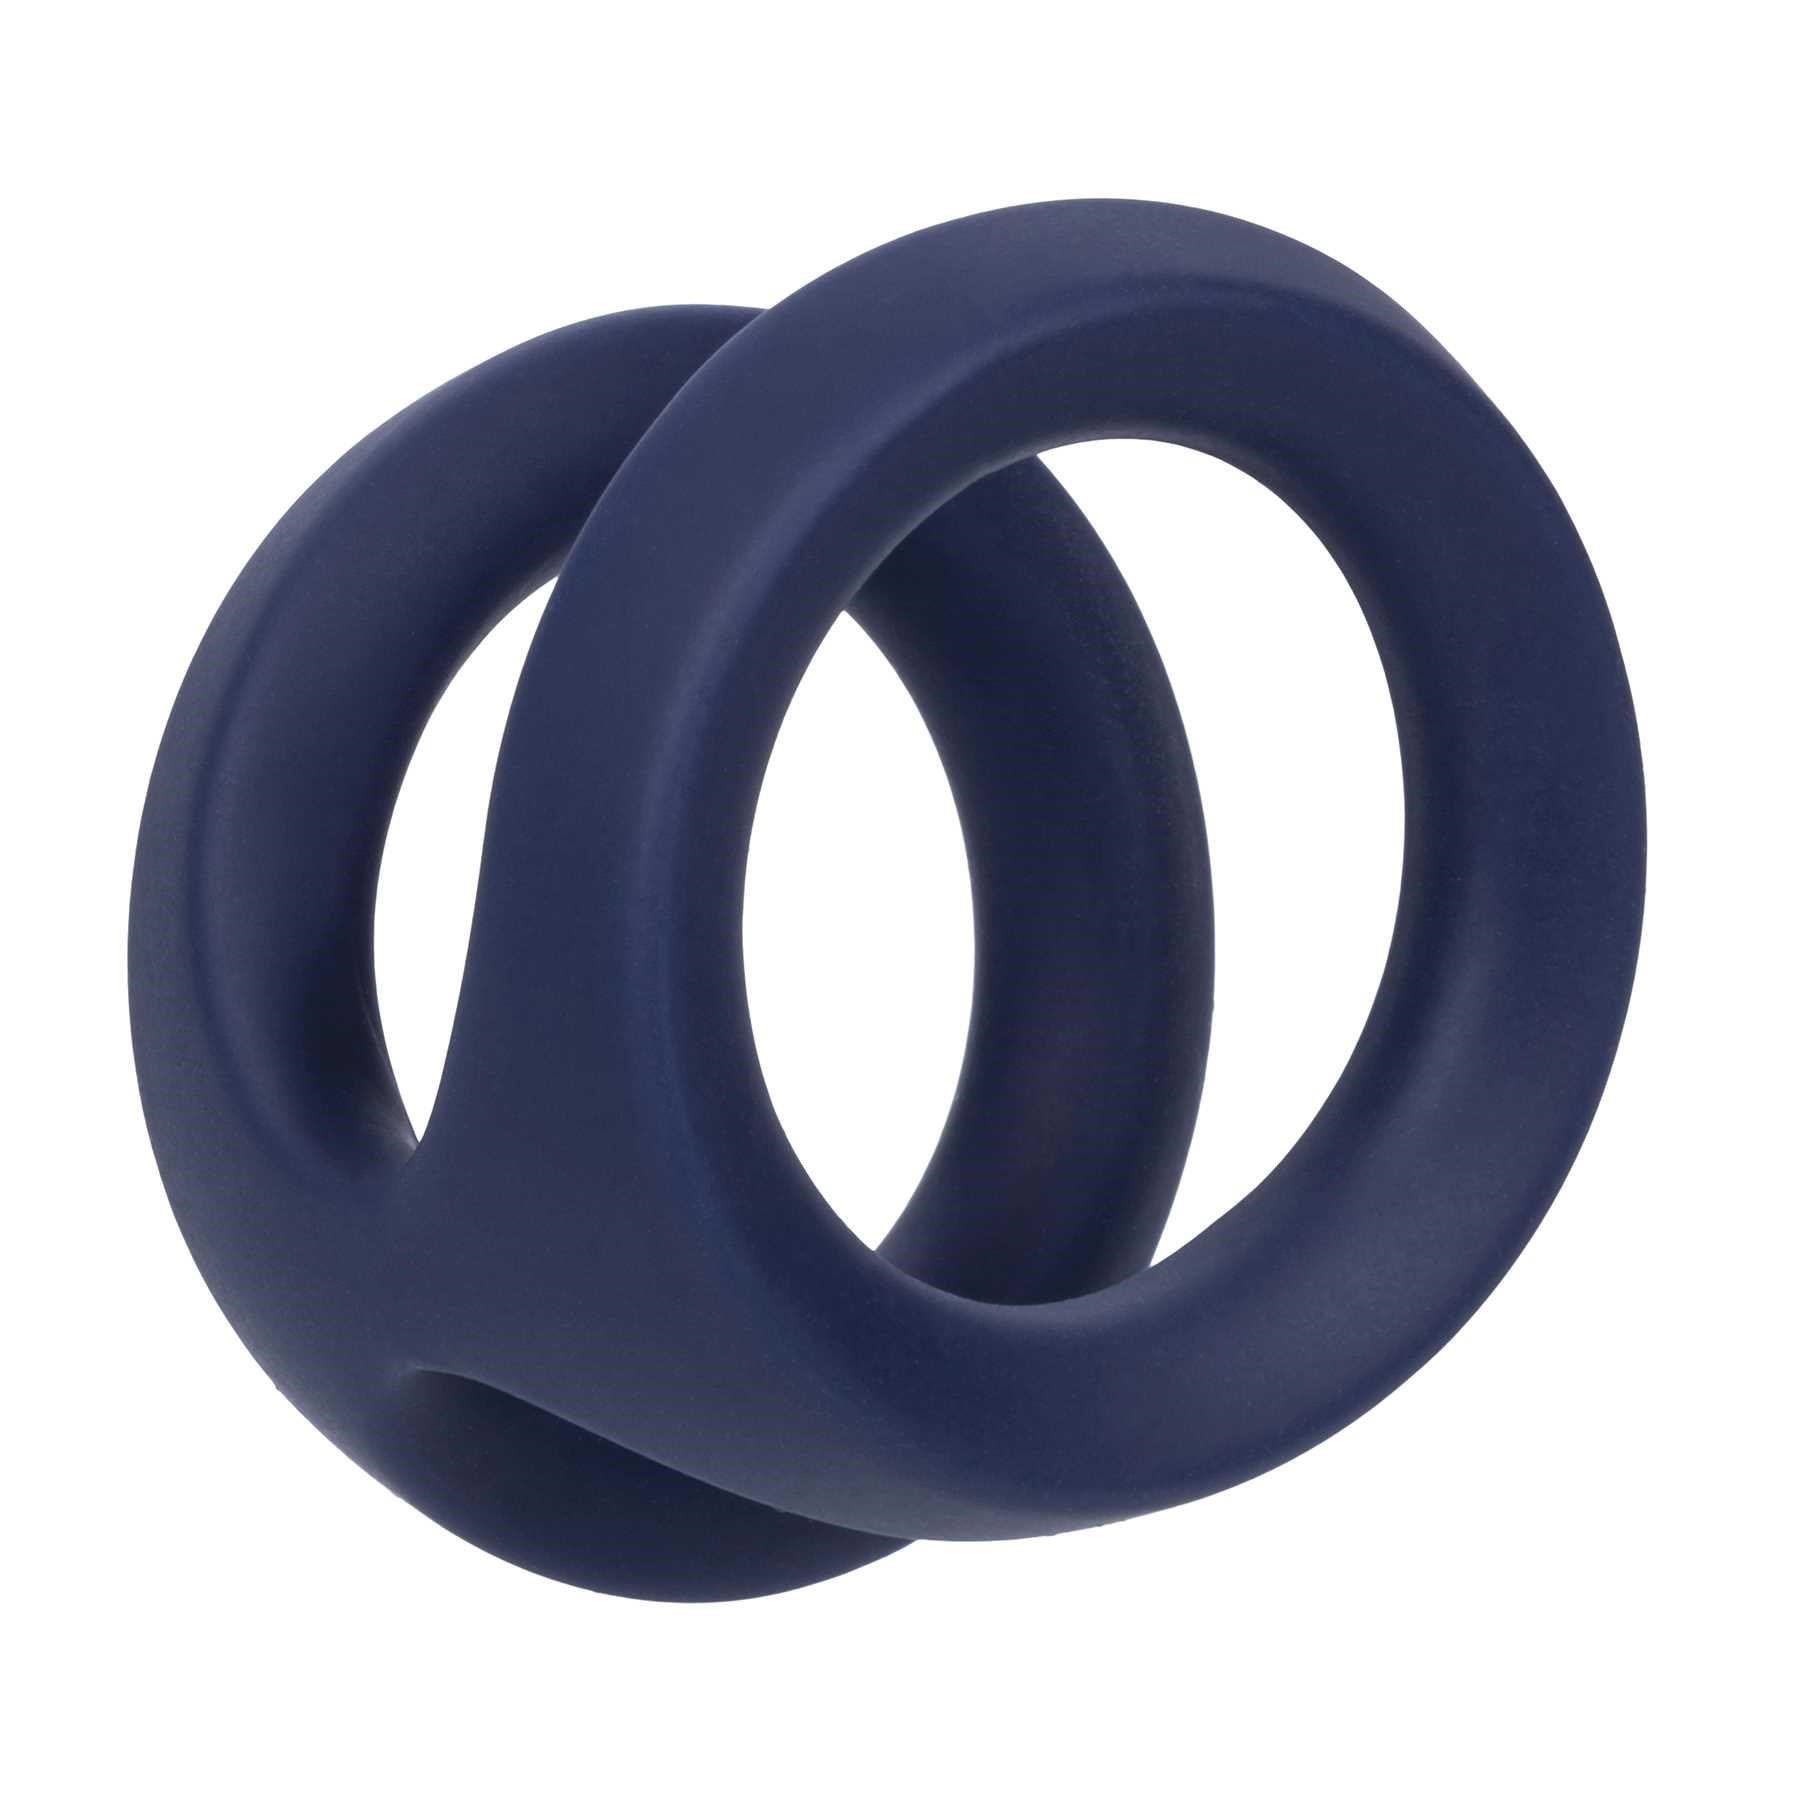 Viceroy Dual Ring product image 7